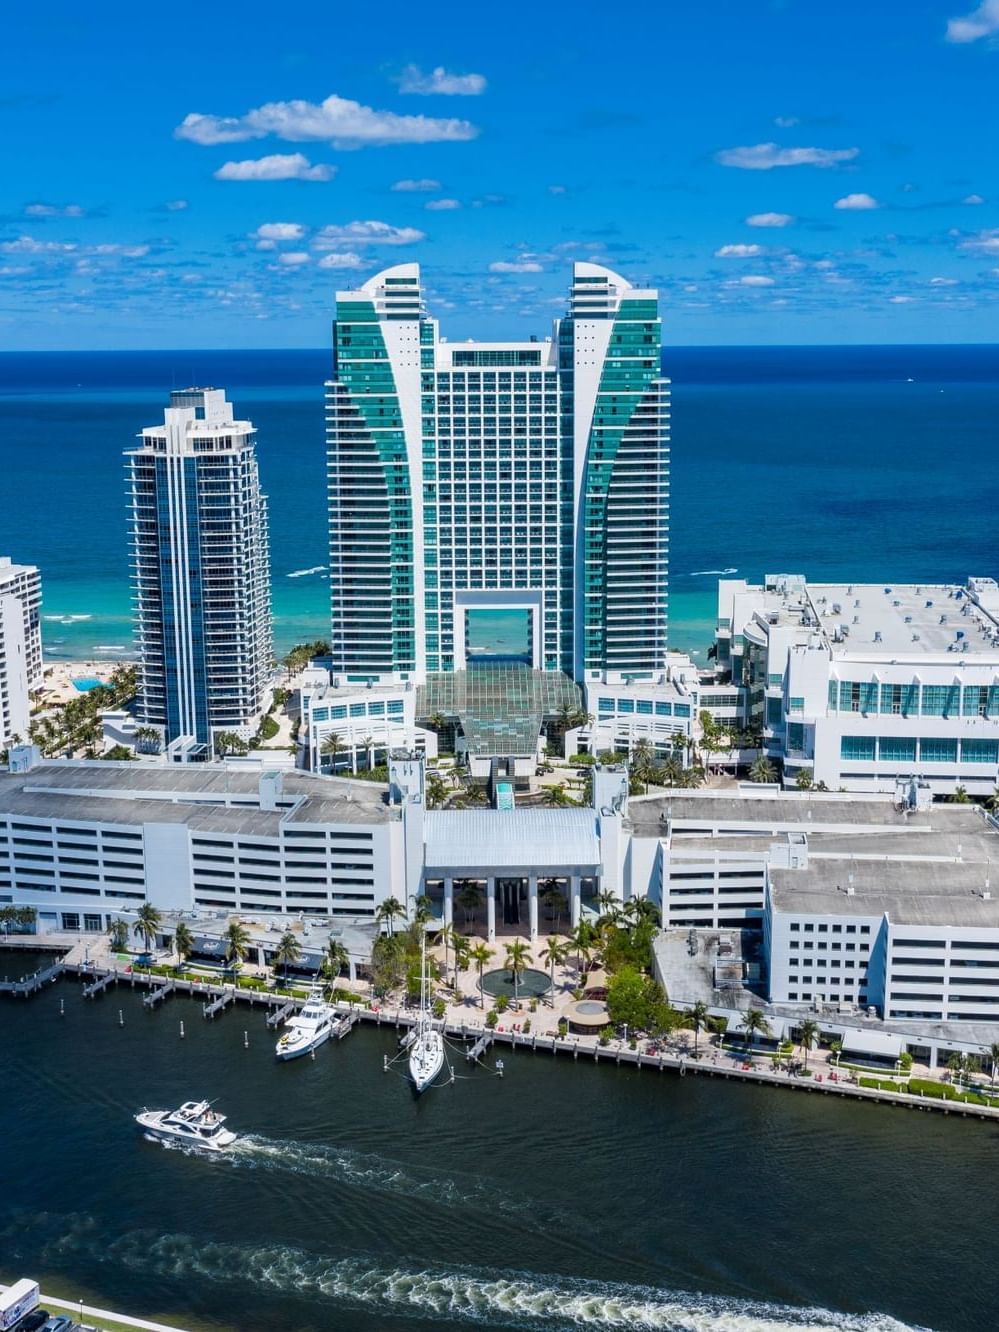 Aerial view of The Diplomat Resort with the ocean